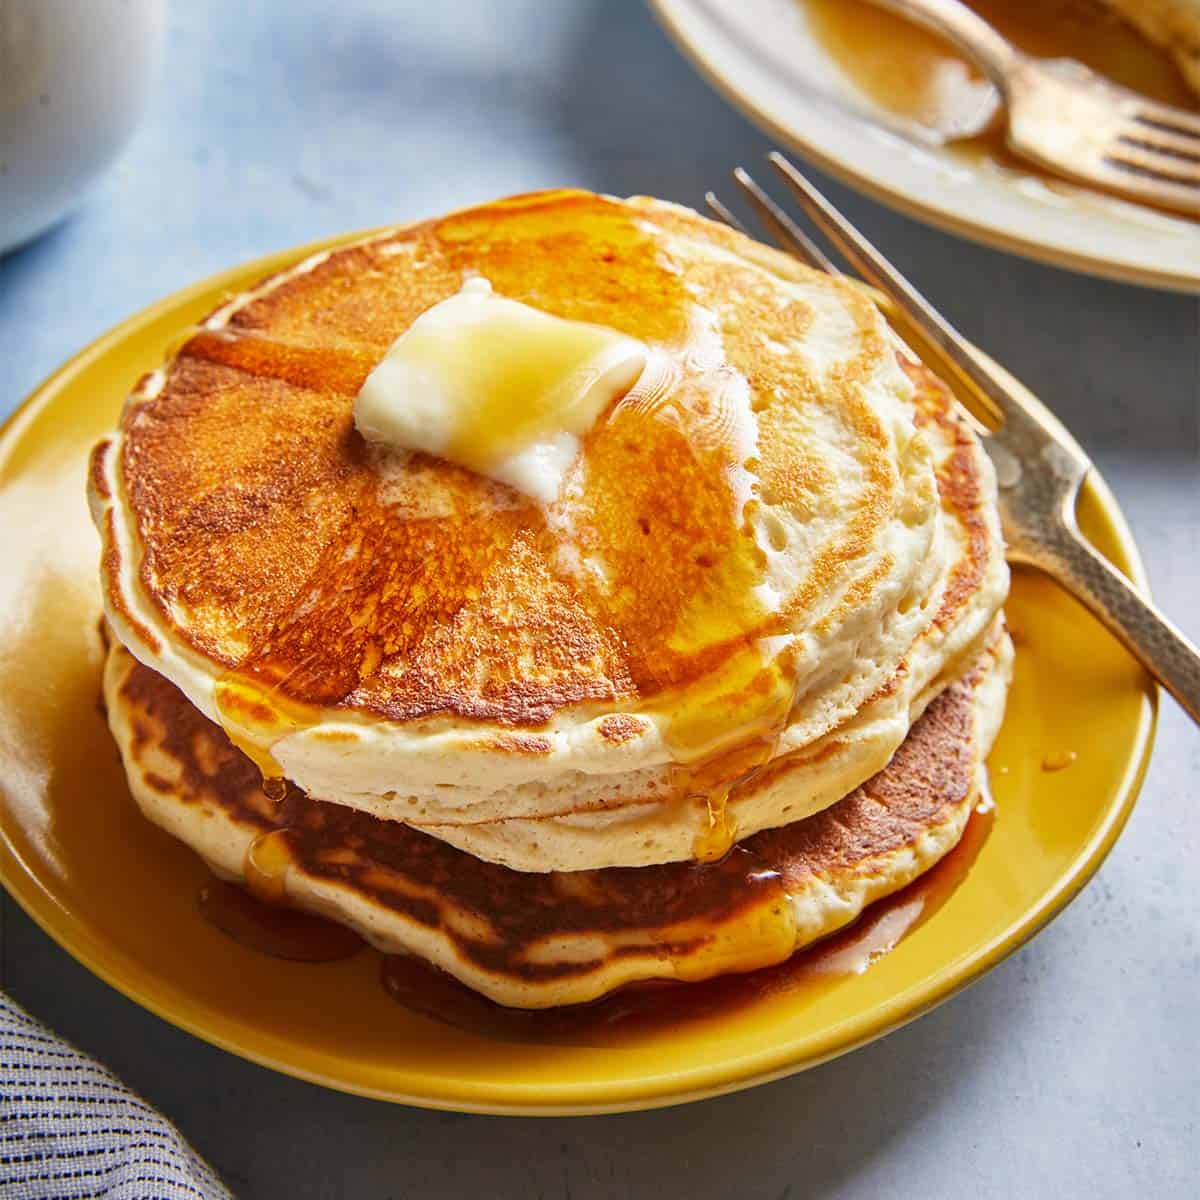 Griddle Cakes Recipe {Light, Fluffy Pancakes}